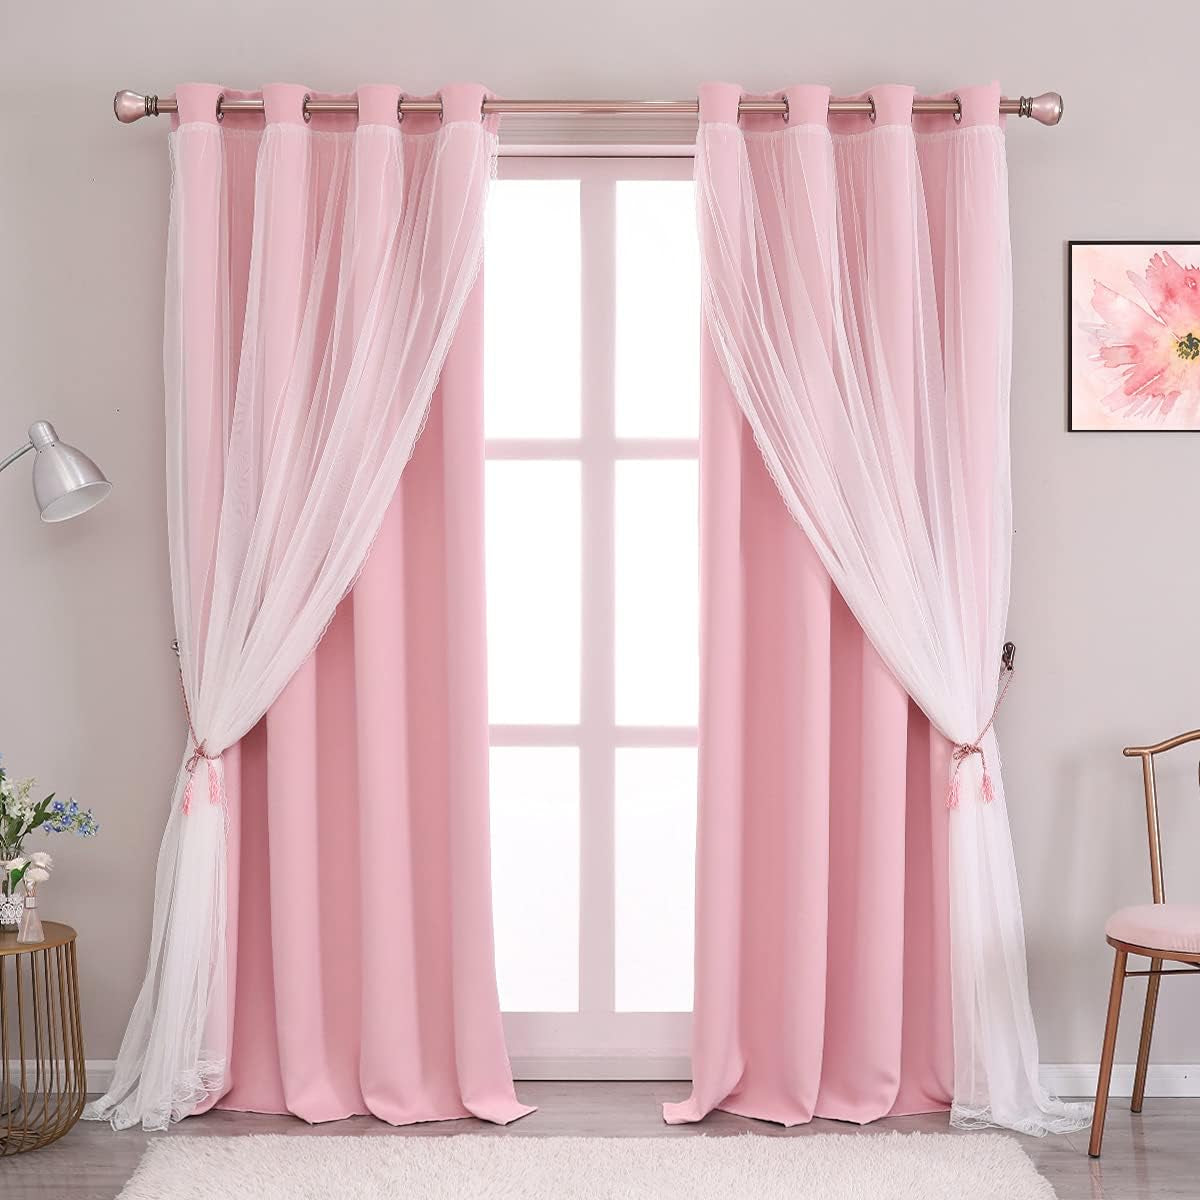 Pink Blackout Curtains 84 Inch Length - Double Layers Princess Girls Curtains & Draperies Panels for Kids Bedroom Living Room Nursery Pink Lace Hem Room Darkening Curtains, 2 Pcs  SOFJAGETQ Pink 52 X 108 